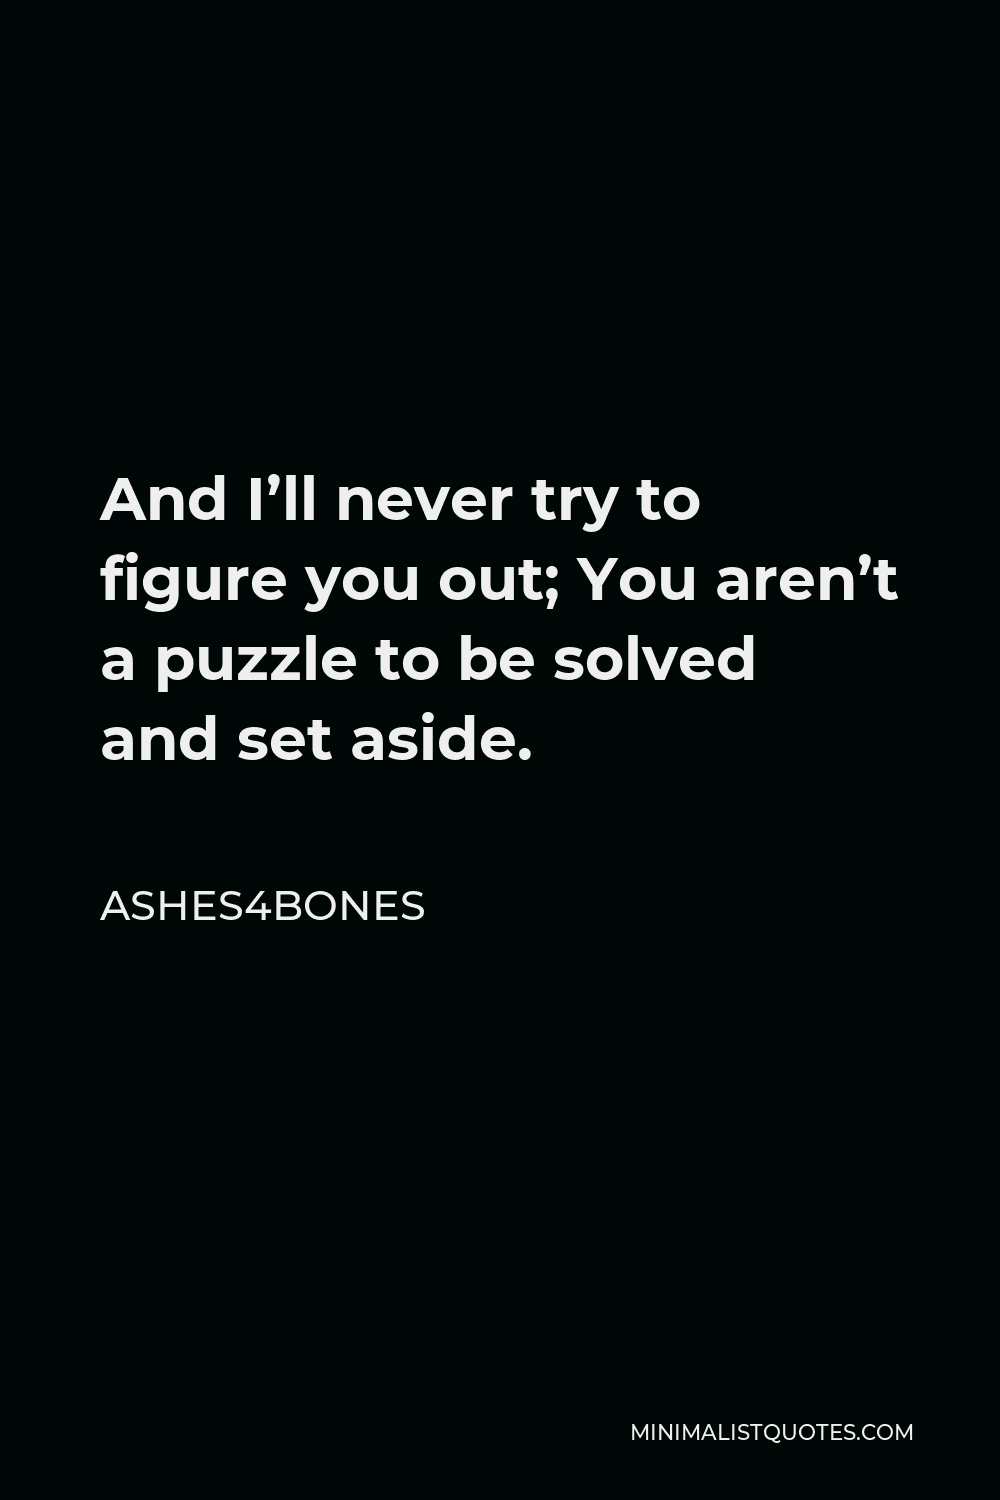 Ashes4bones Quote - And I’ll never try to figure you out; You aren’t a puzzle to be solved and set aside.